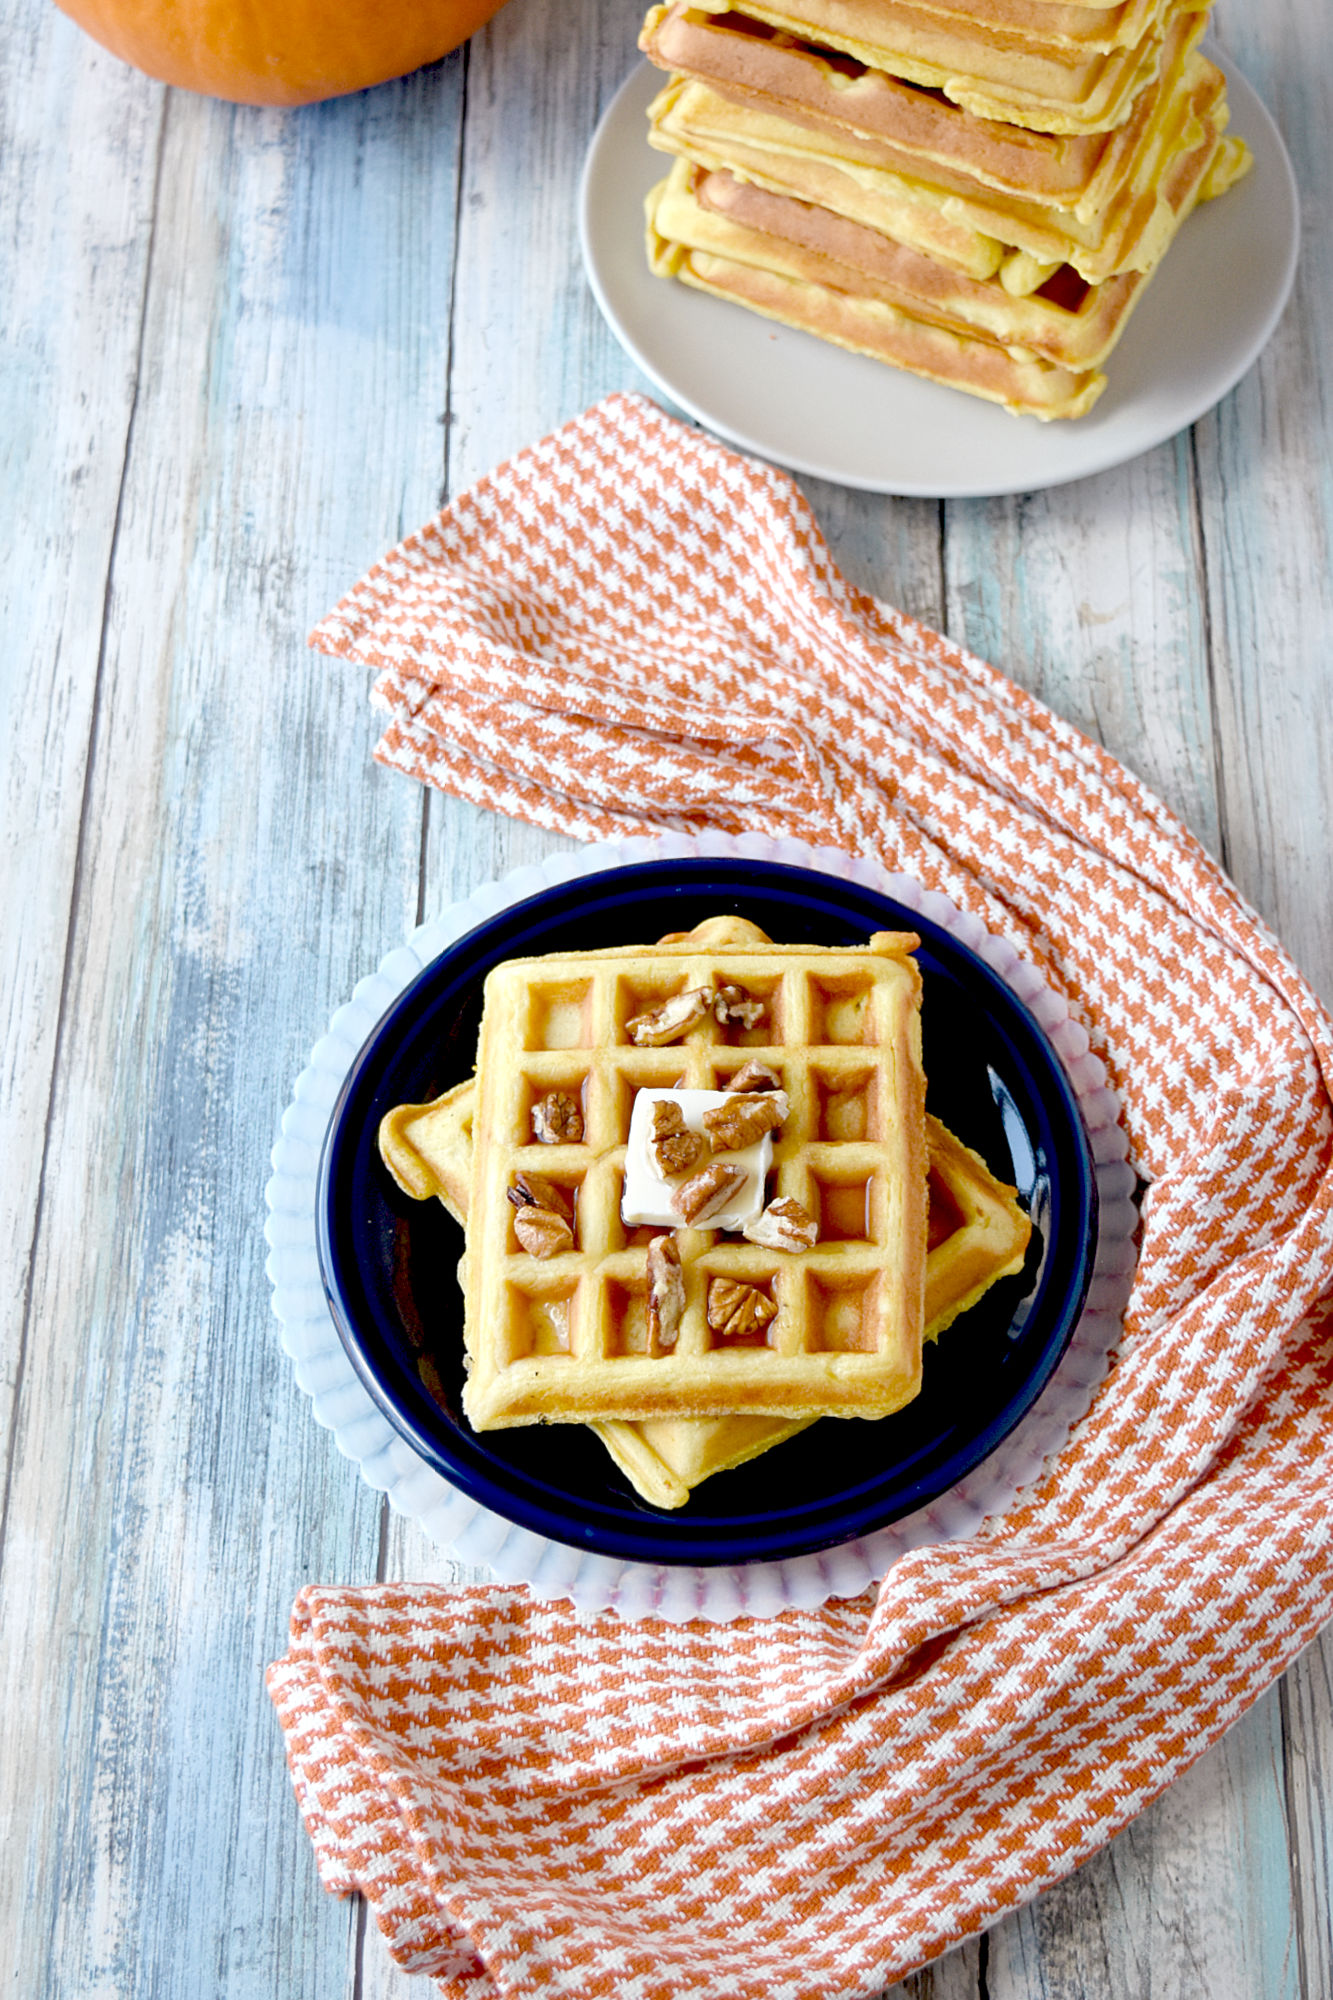 Overnight Pumpkin Waffles are light, fluffy, and irresistible.  Your family will love them and ask for them all the time.  You will love how easy they are to make. #PumpkinWeek